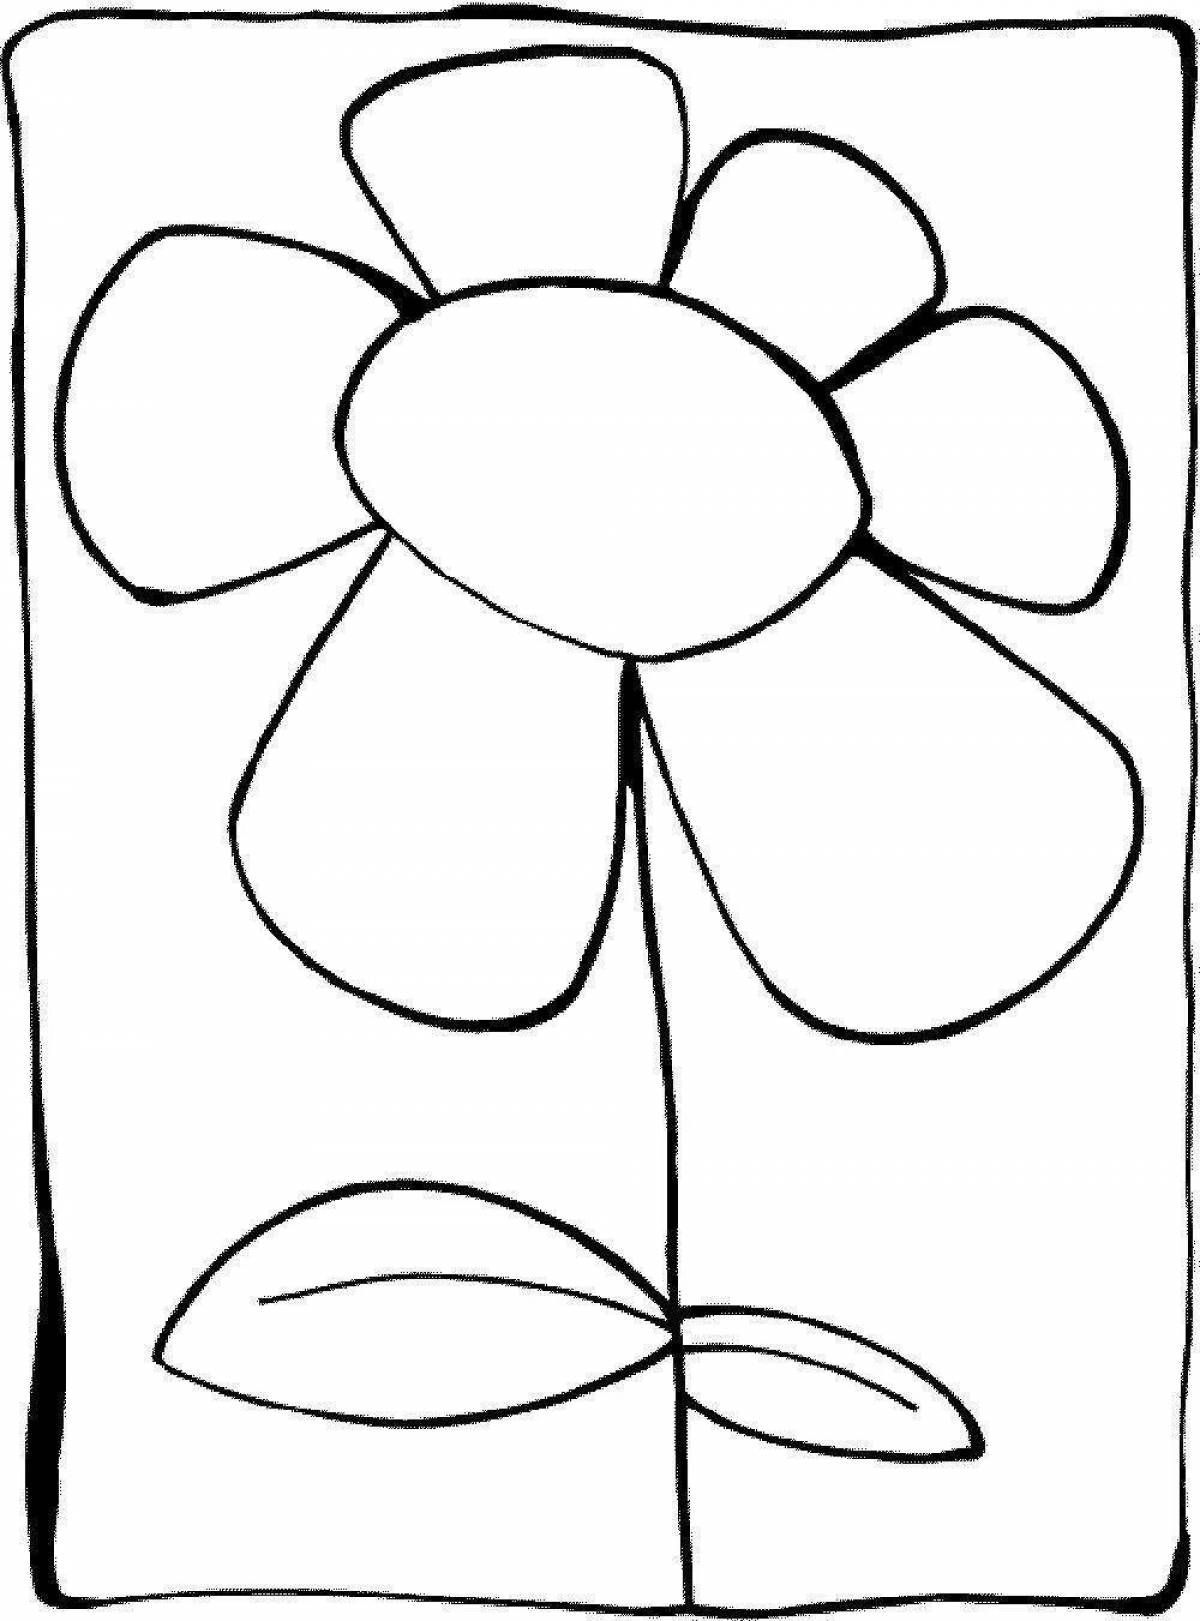 Coloring flower template with seven colors